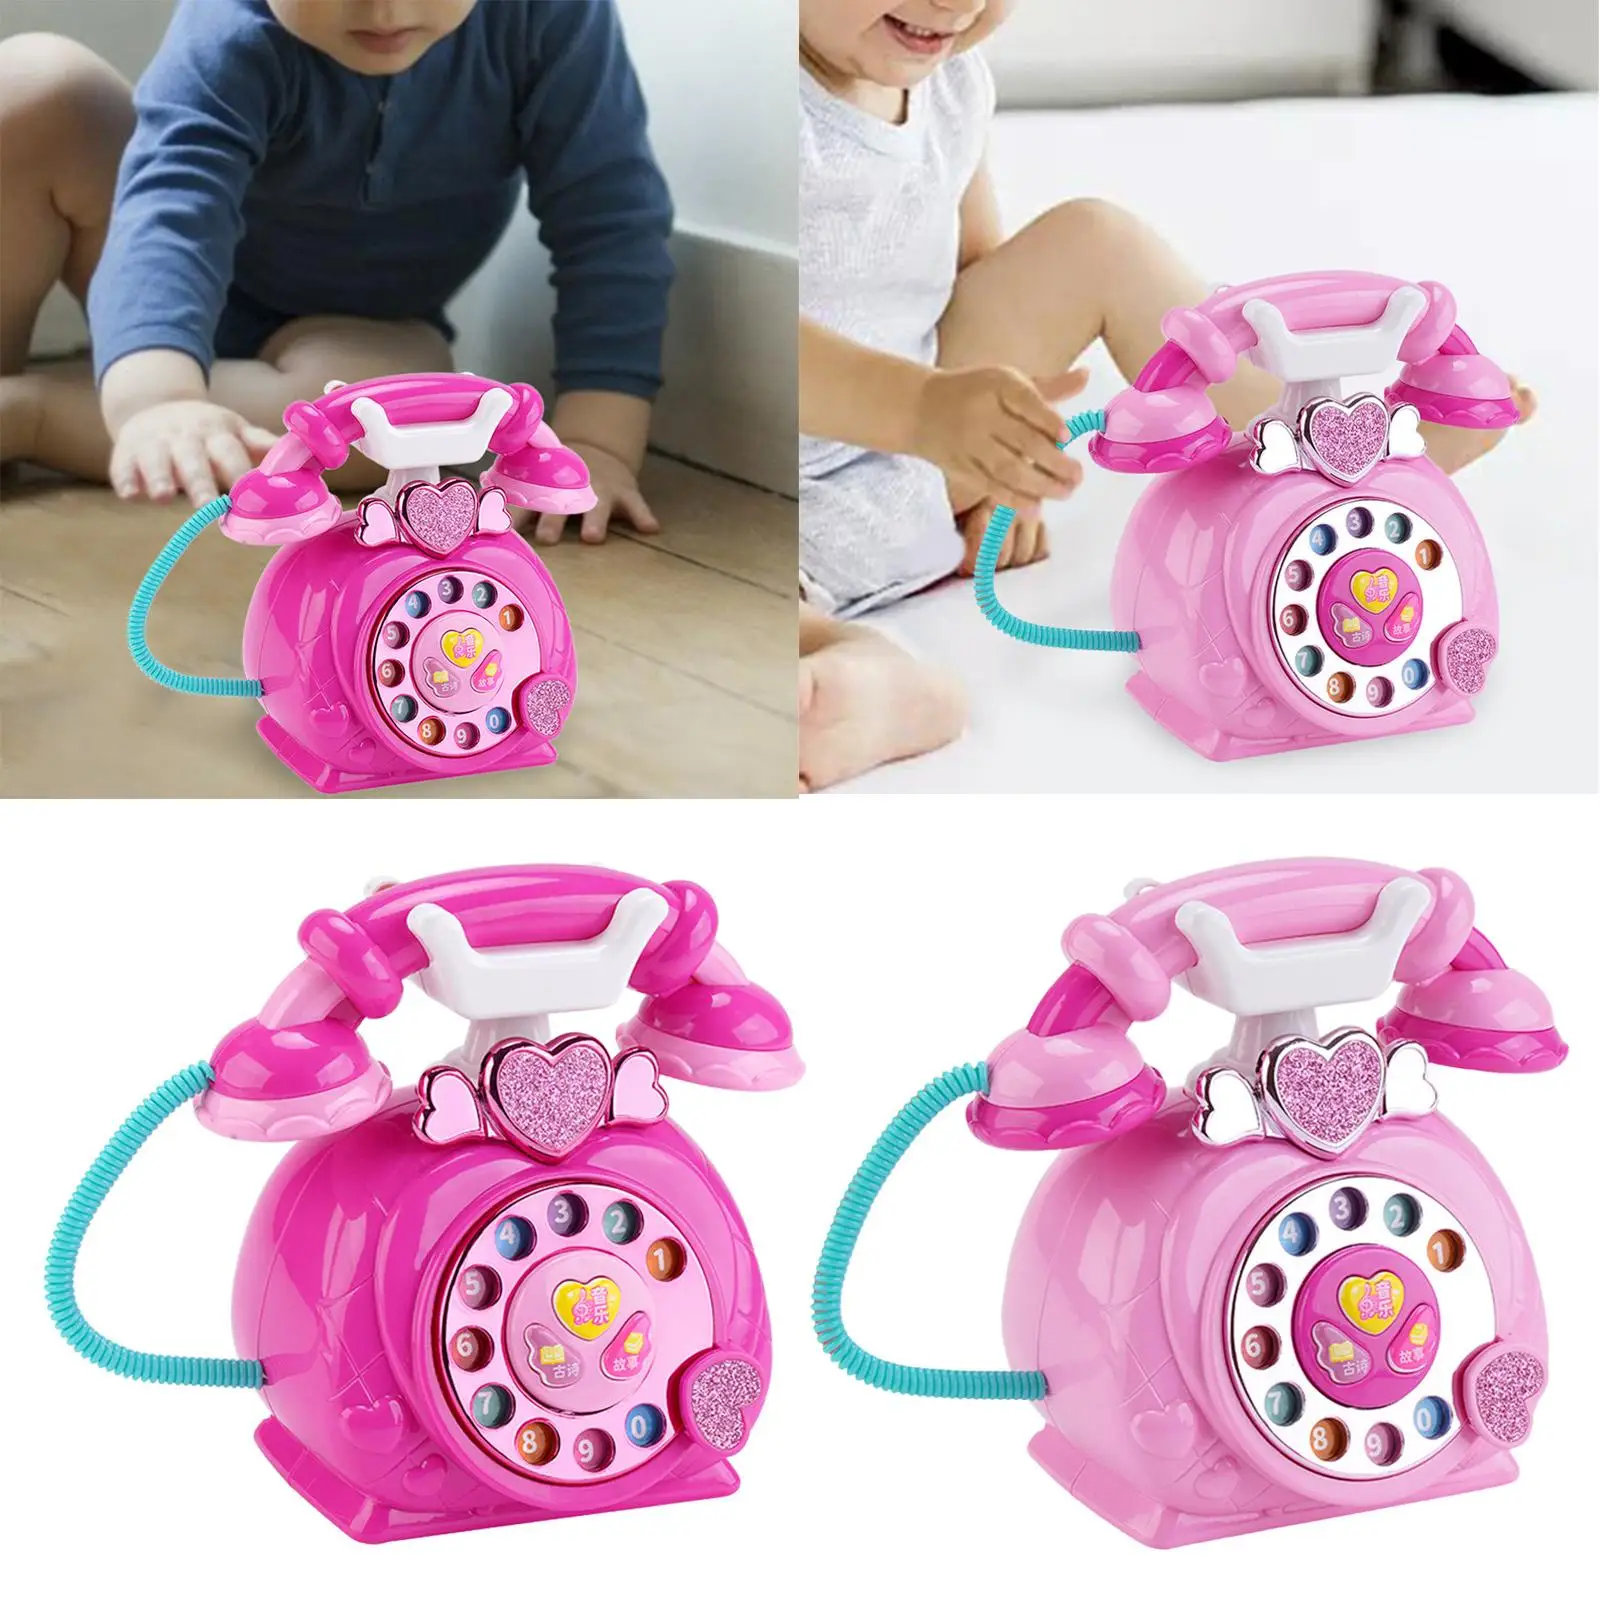 Telephone Toy Storytelling Machine Gift Simulated Develop Leaning Machine Baby Musical Toys for Children Baby Kids Pretend Play